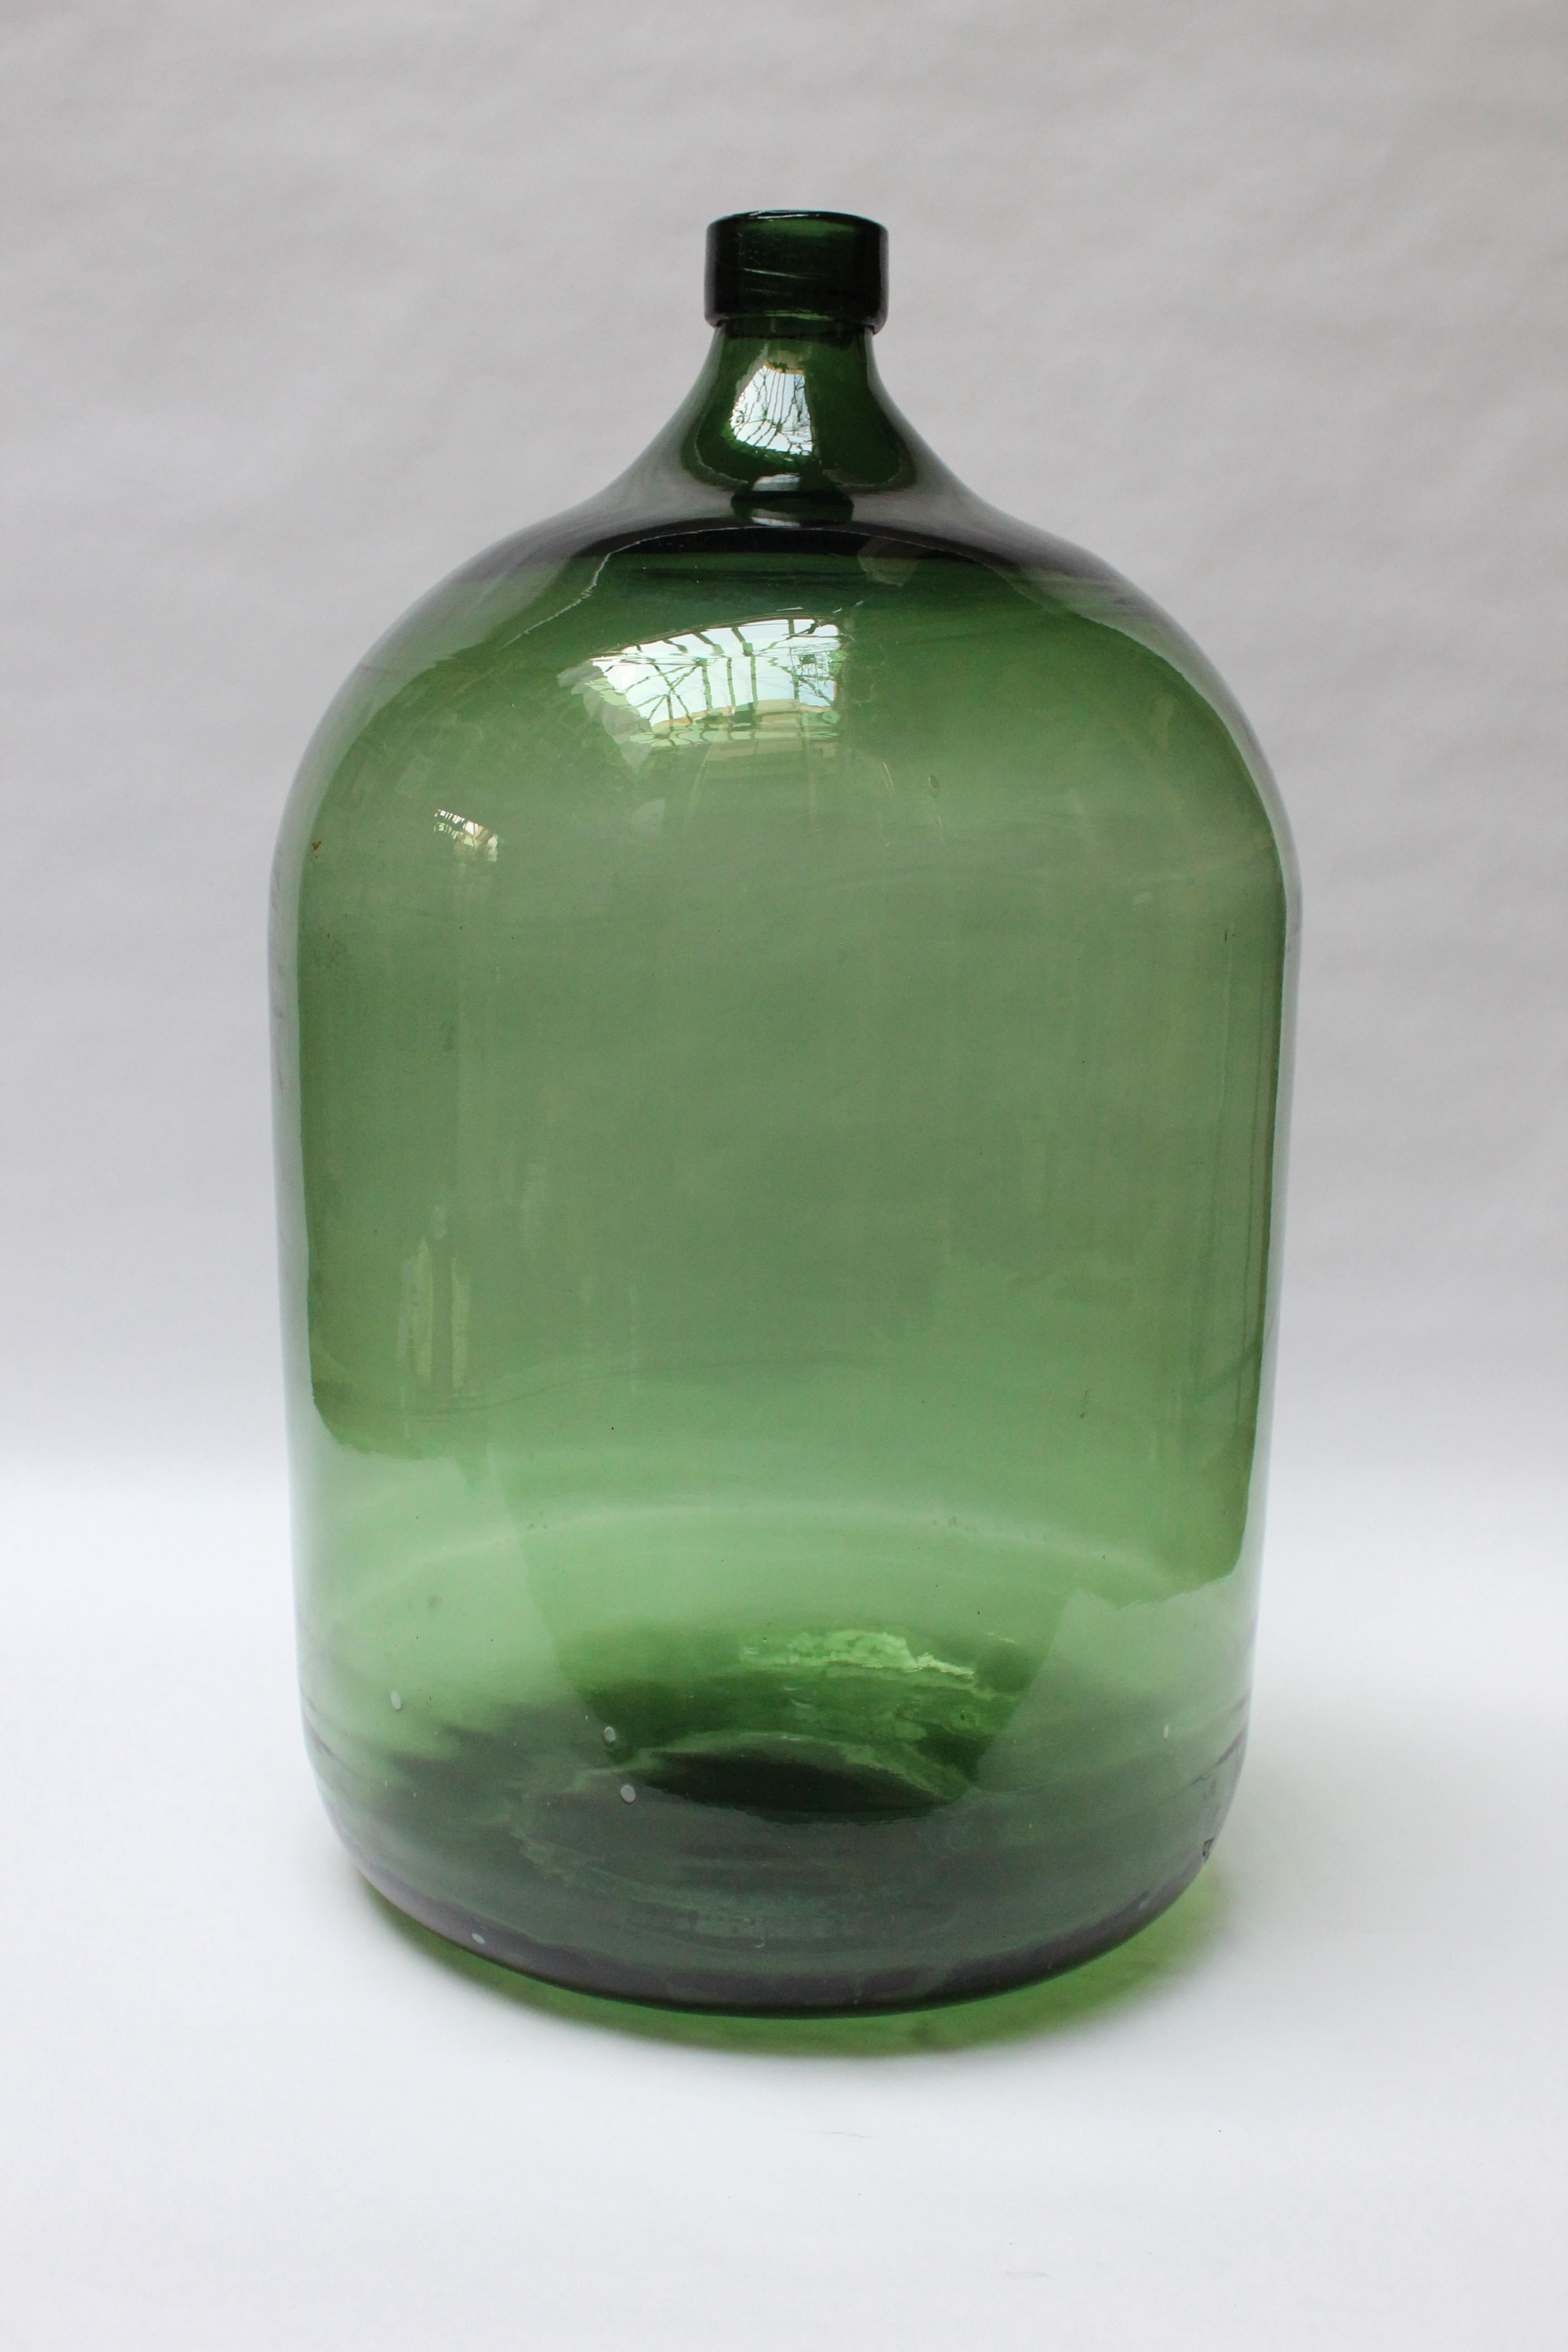 French Demijohn / Carboy originally used for transporting wine (ca. late 19th Century, France). Composed of free-blown emerald glass exhibiting trapped air bubbles within the glass itself. Striking color and unique form with a shorter lip and more